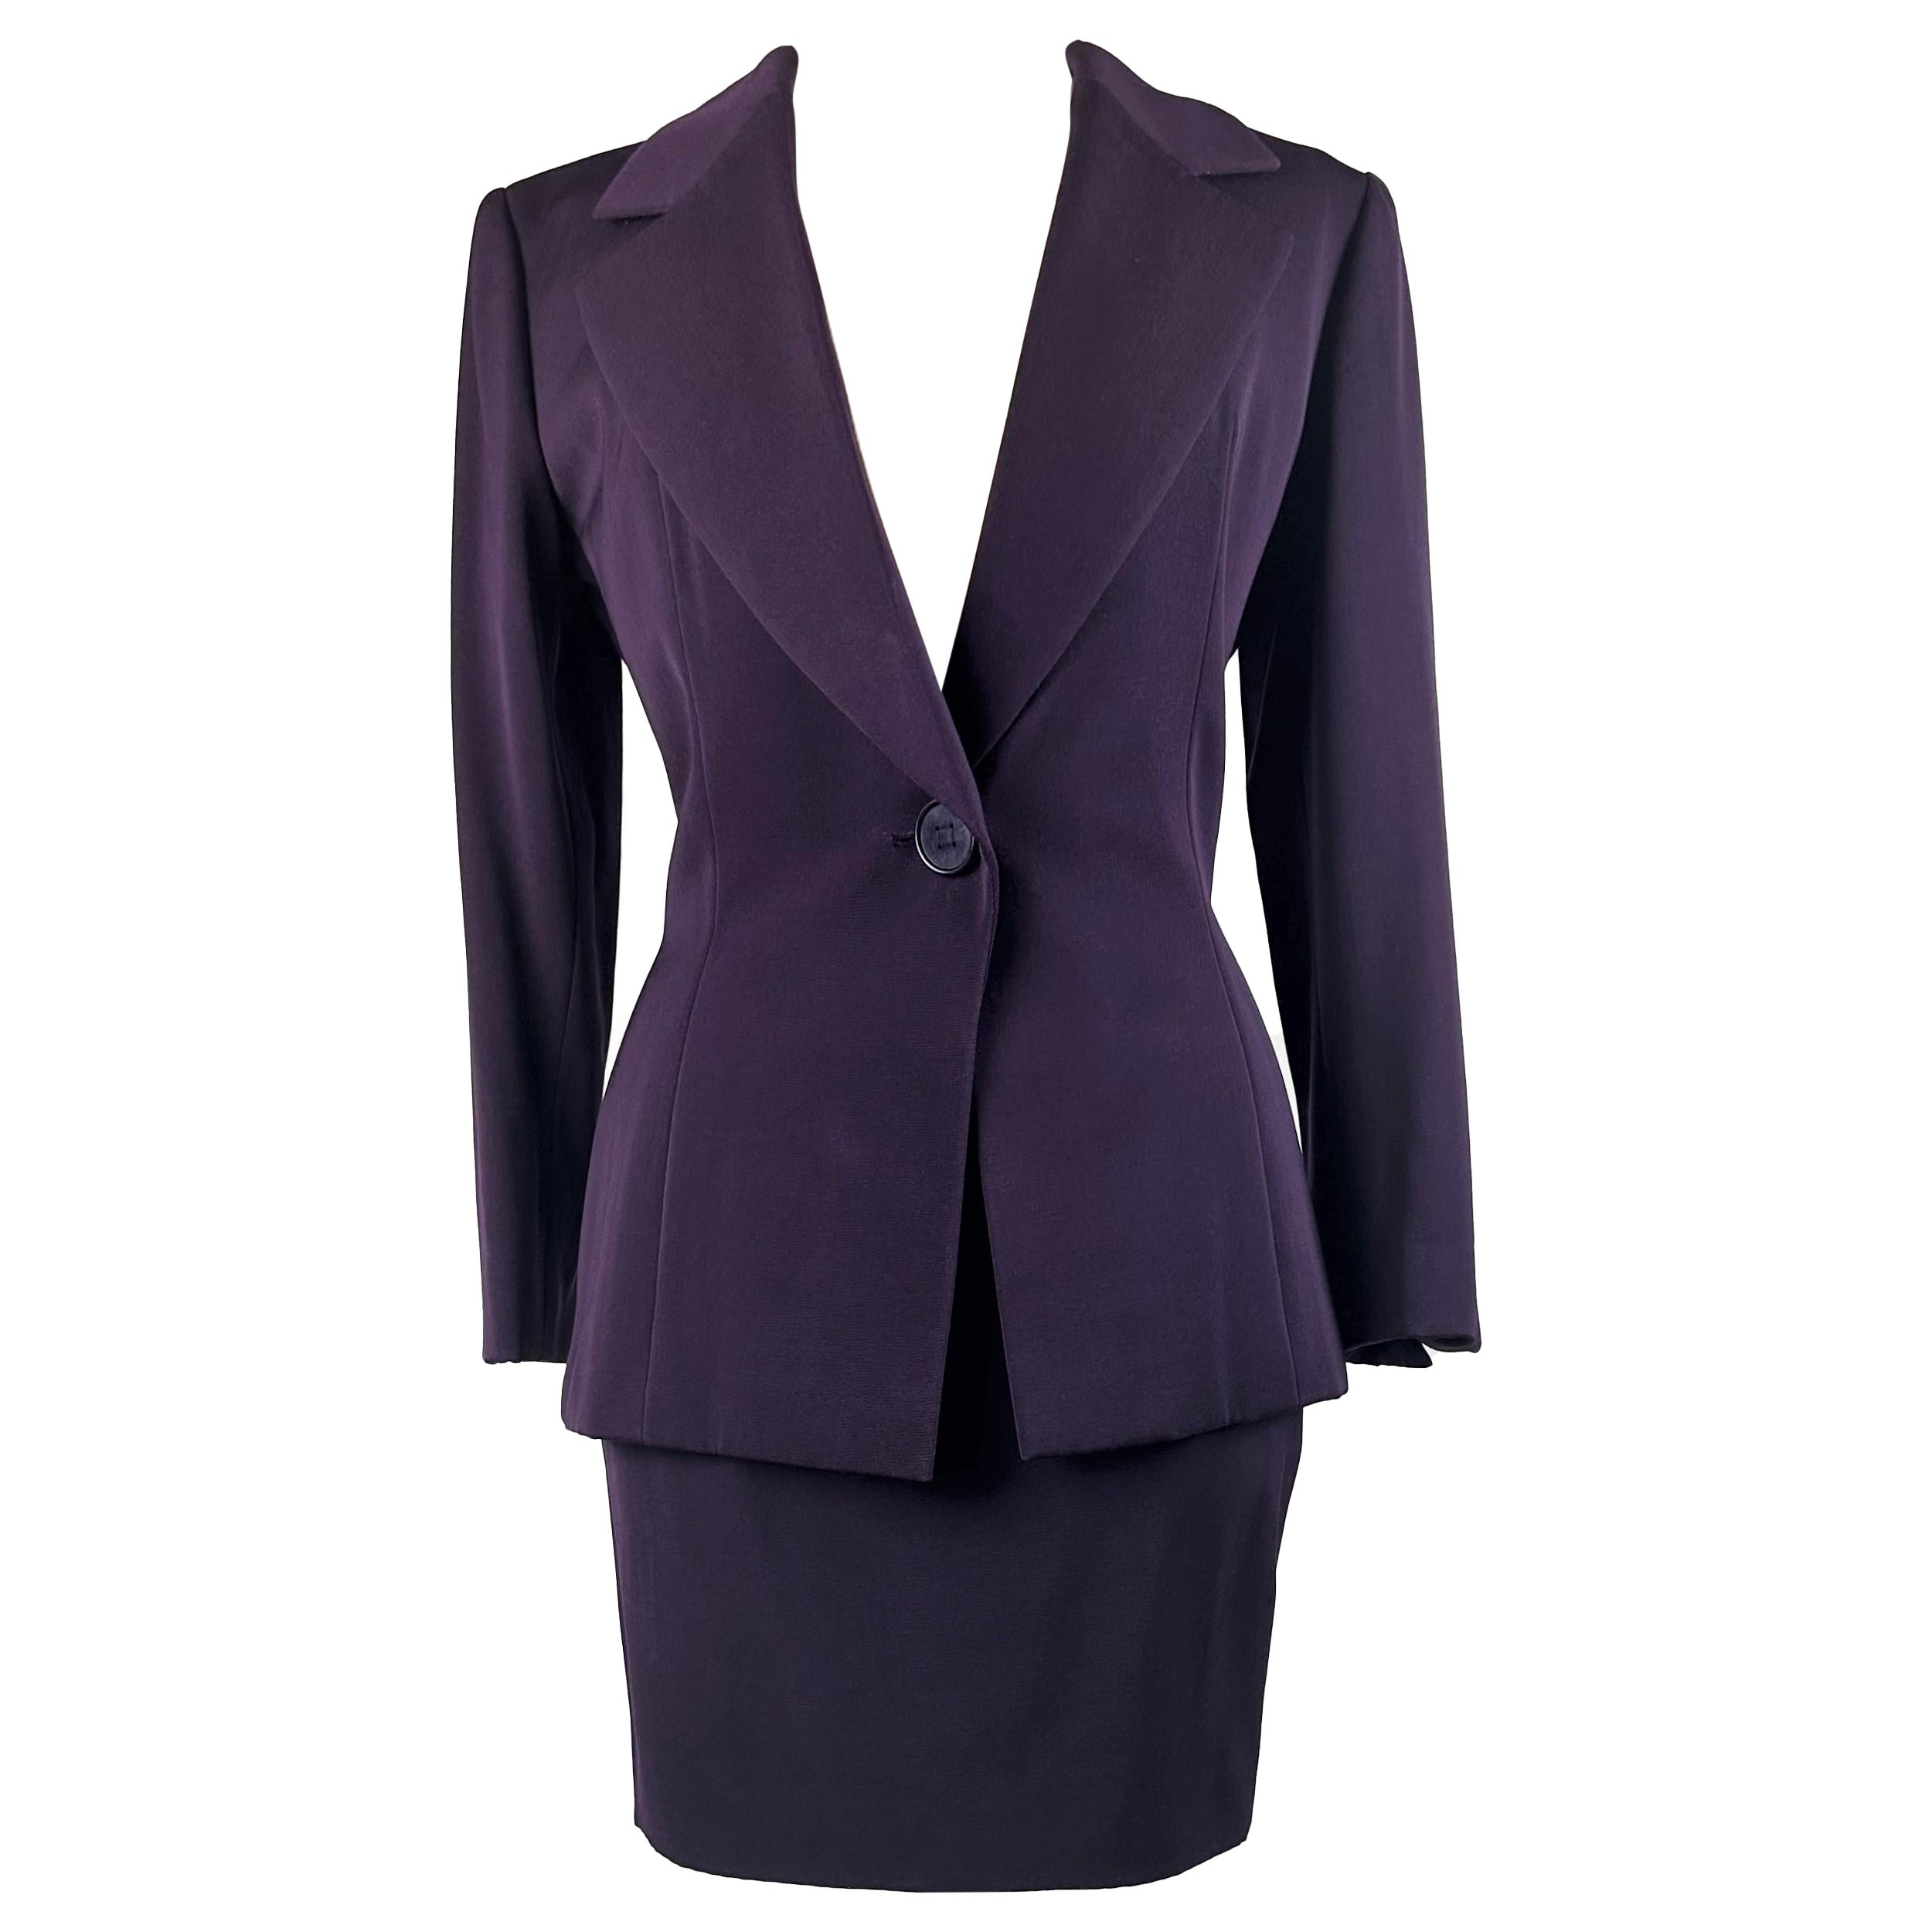 Skirt suit by Gianfranco Ferré for Christian Dior Haute Couture Circa 1995 For Sale